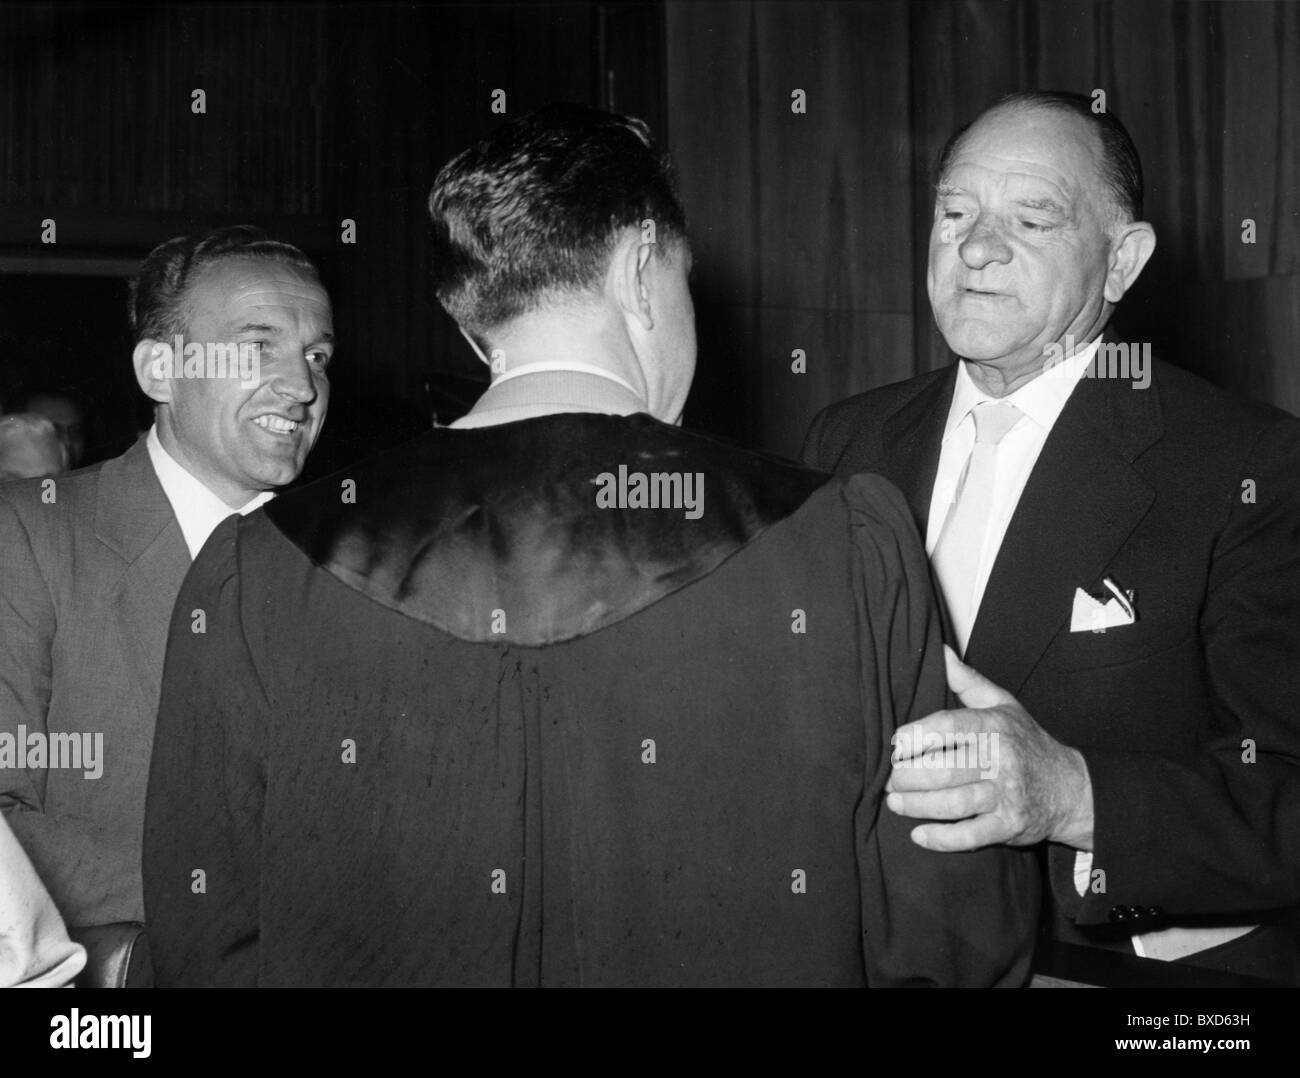 justice, trials, Roehm Trial, Munich, May 1957, the defendant Josef 'Sepp' Dietrich (left) shaking hands with his lawyer Rolf Bossi, 14.5.1957, left hand: the Stuka dive-bomber pilot Hans Ulrich Rudel, Additional-Rights-Clearences-Not Available Stock Photo